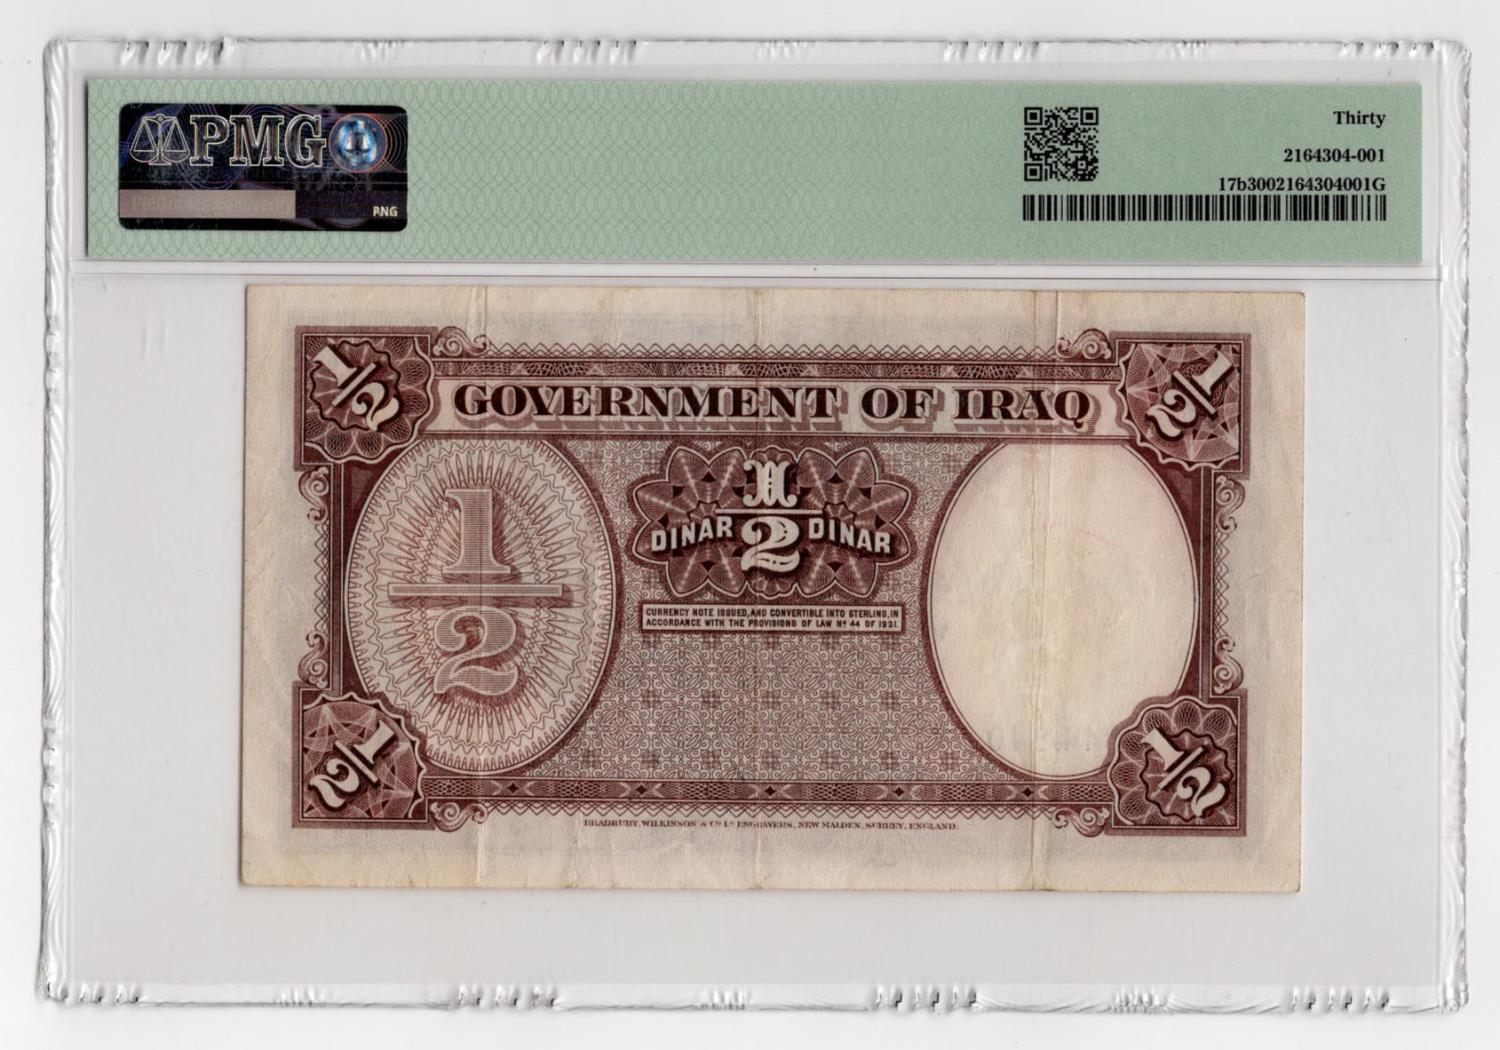 Iraq 1/2 Dinar issued 1942 (Law of 1931), portrait King Faisal II as a child at right, signed Kennet - Image 2 of 2